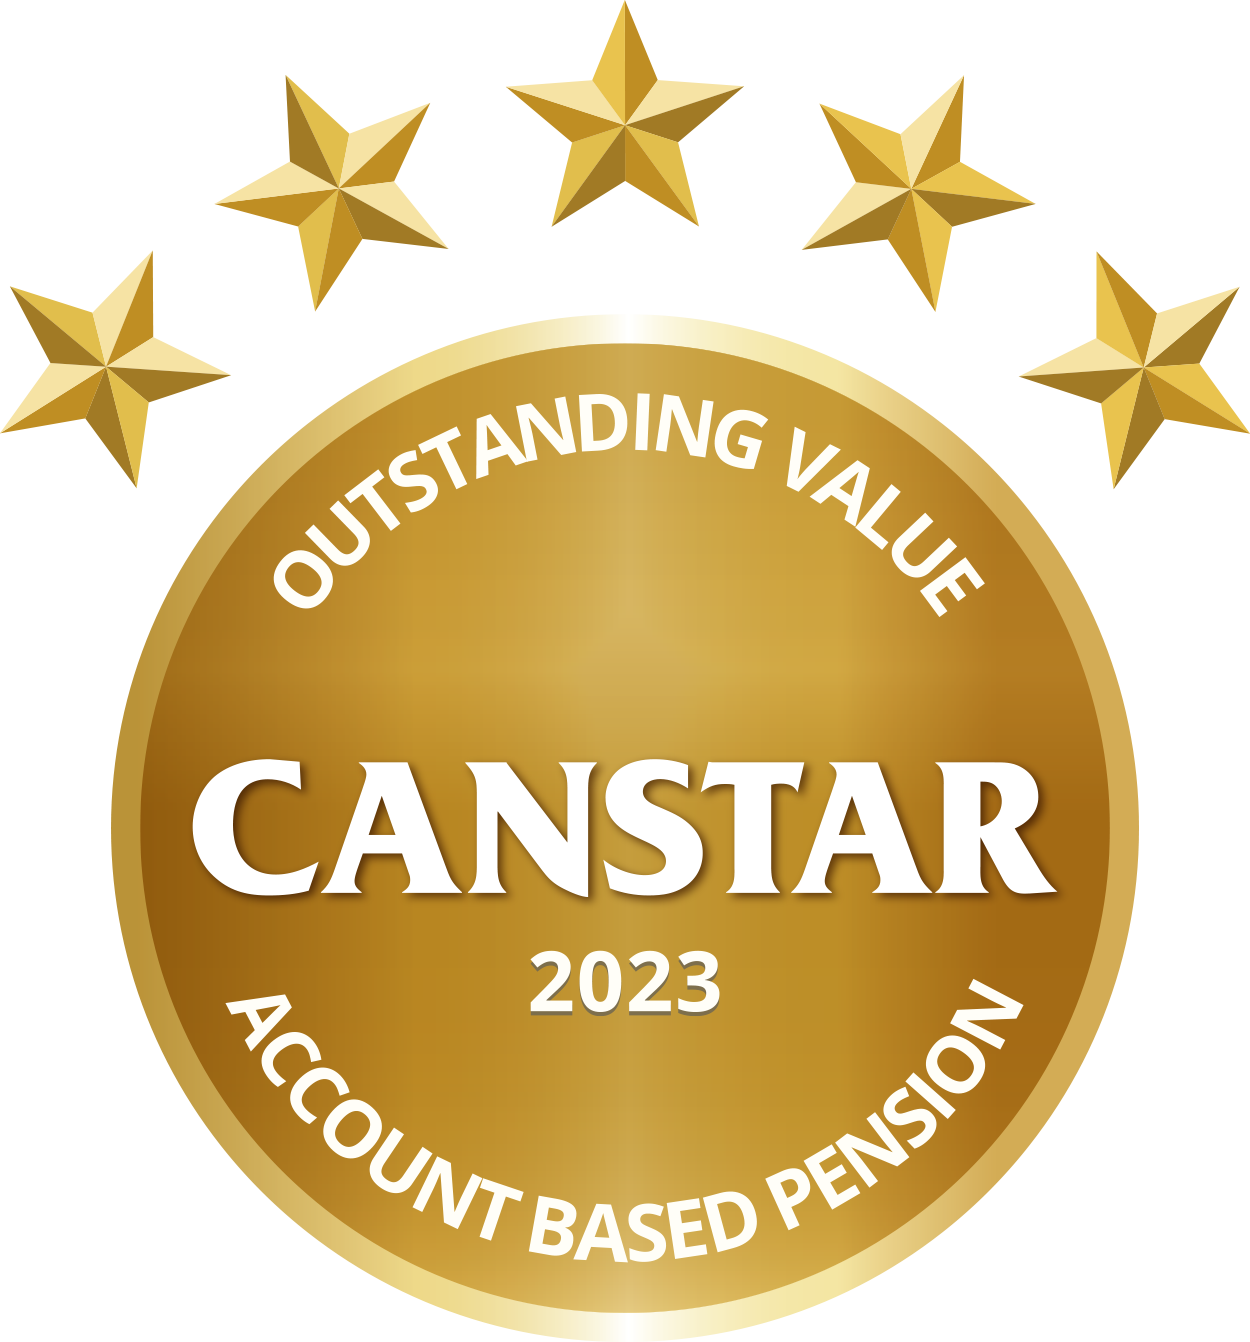 Canstar outstanding value 2023 account based pension award logo